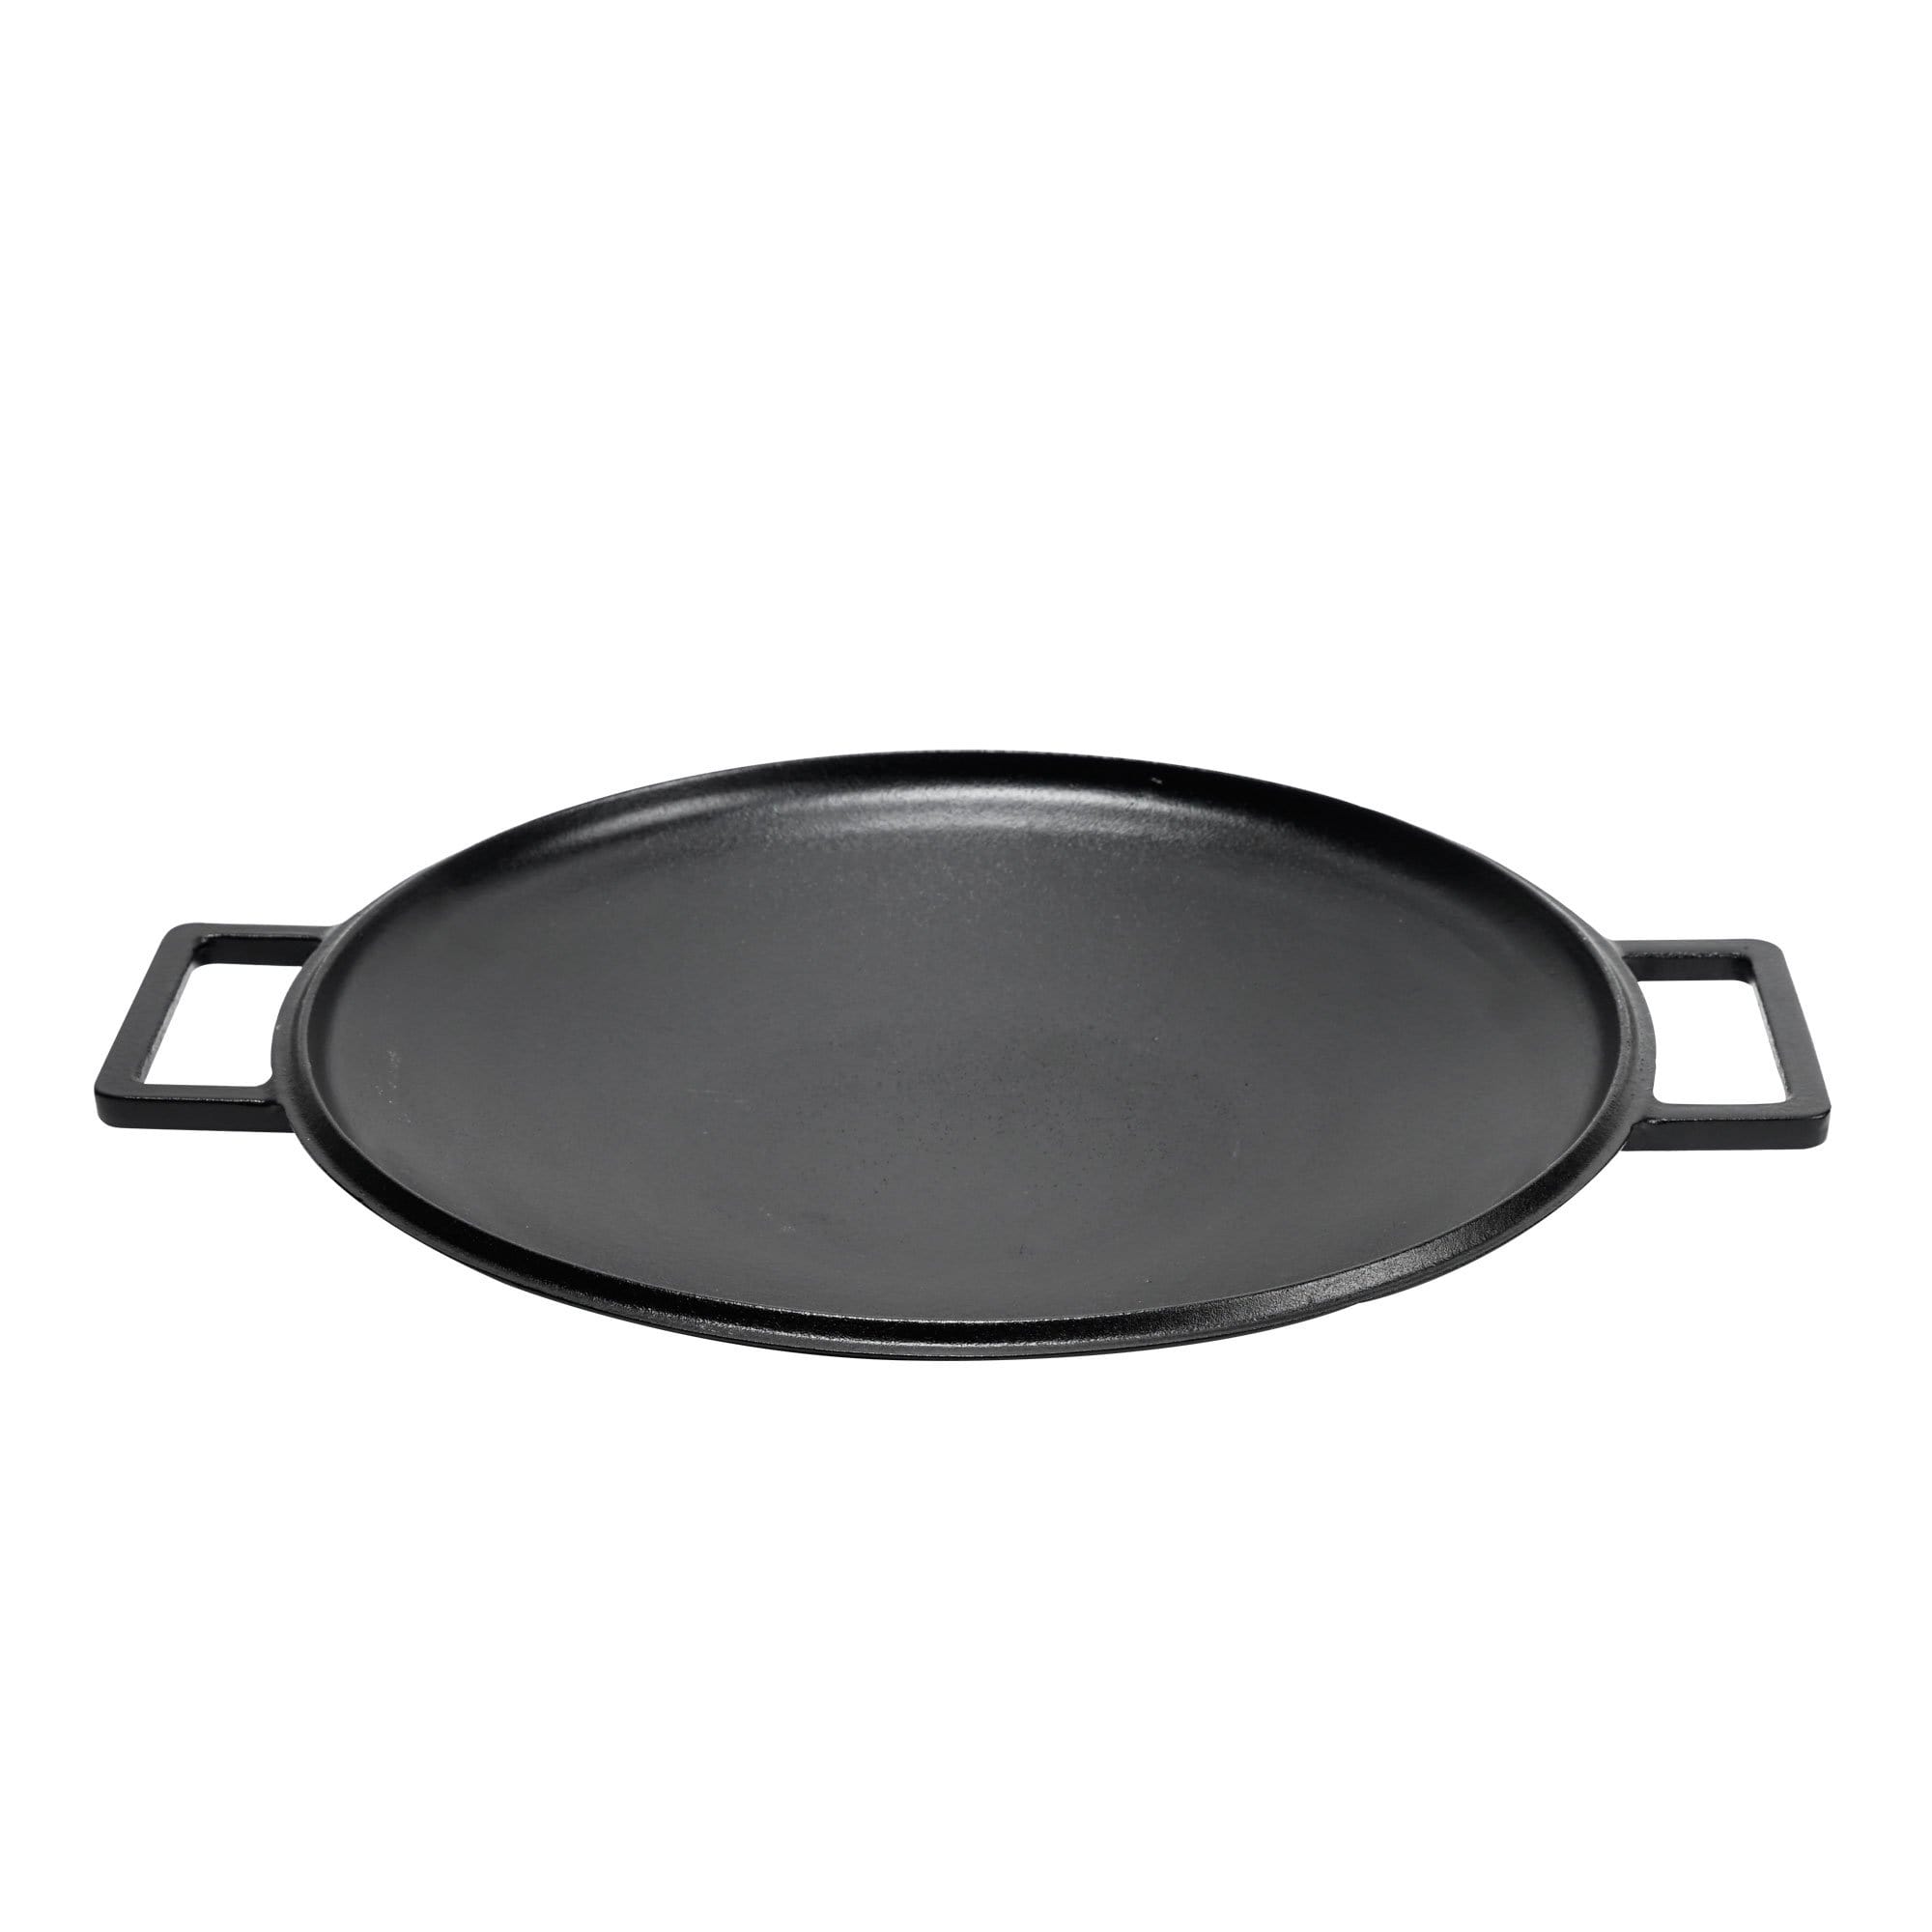 MOOSSE Premium Korean BBQ grill Pan, chosun griddle, Enameled cast Iron  grill for Induction cooktop, Stove, Oven, No Seasoning R